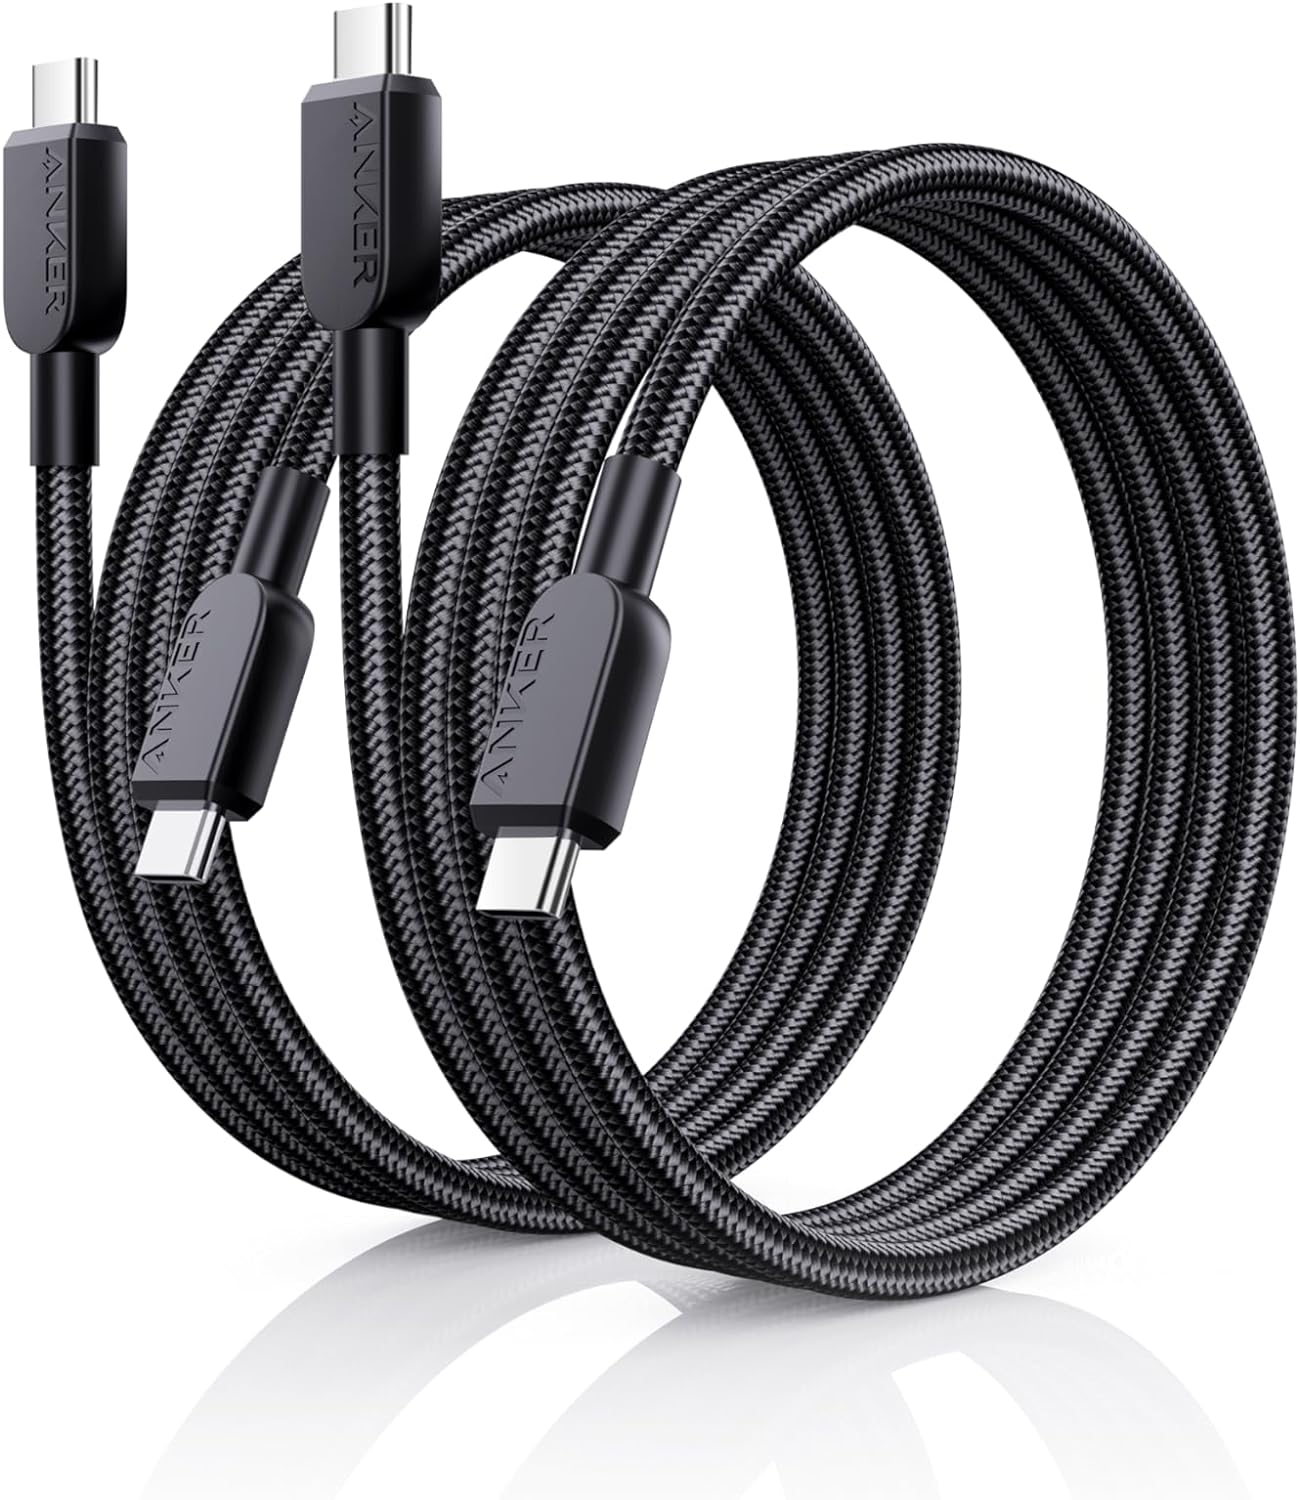 Anker 543 USB C to USB C Cable (240W, 10ft)